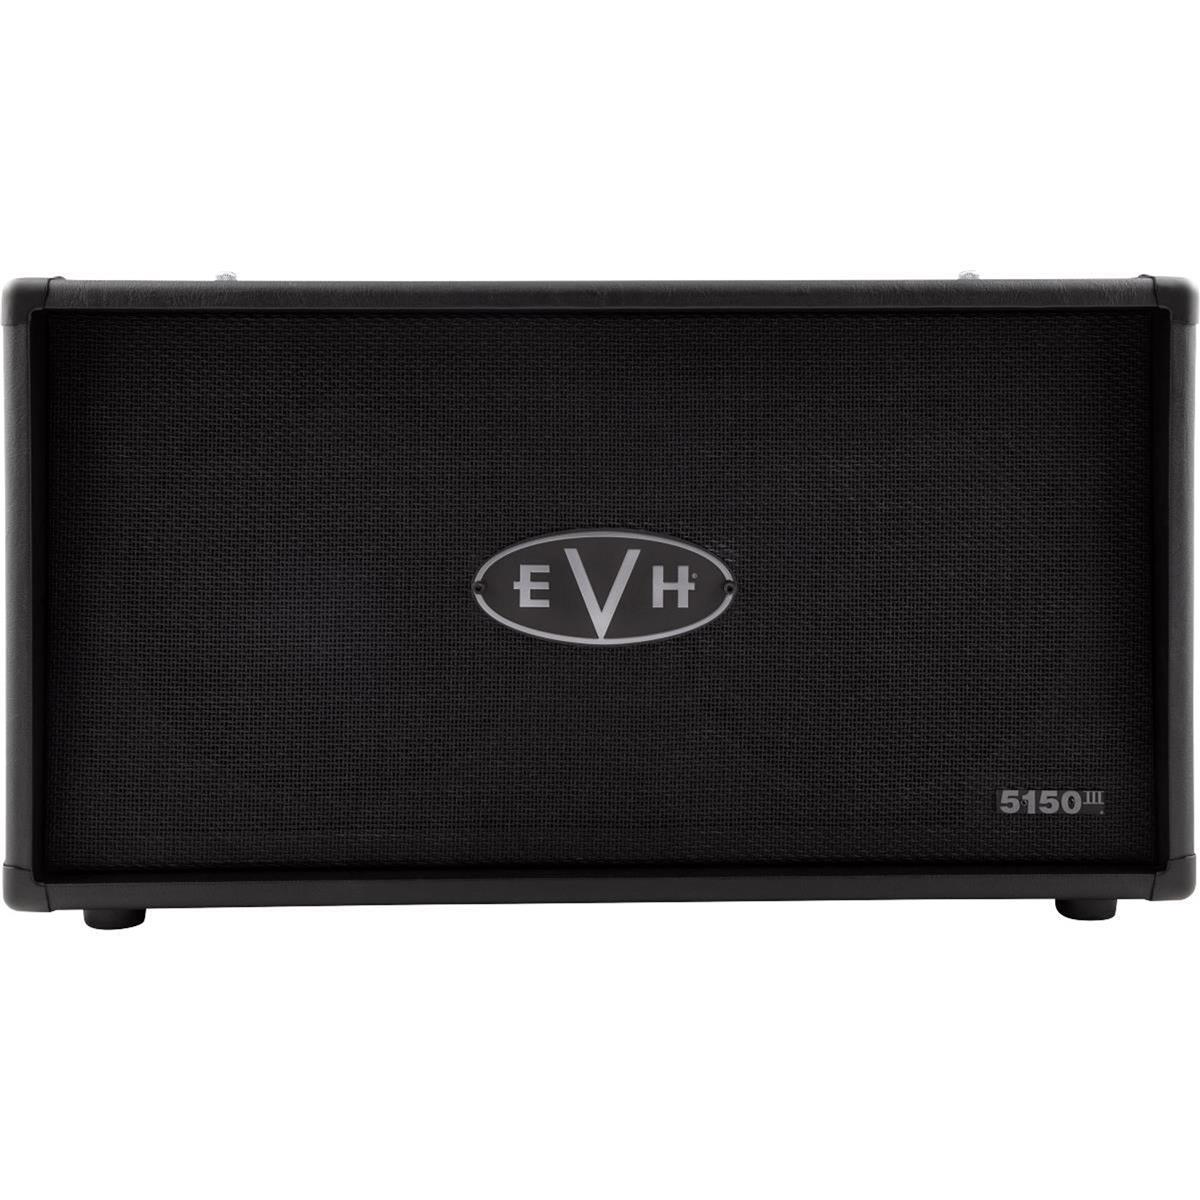 EVH 5150III 50S 212ST 60W 2x12" Straight Cabinet with Celestion G12H Speakers The all-new EVH 5150III 50S 212ST Cabinet is the perfect companion to the new EVH 5150III 50W 50S Head, with matching stealth black chrome EVH logo badges.This 60-watt, 16 ohm front-loaded 2x12 straight cabinet features rock solid birch construction and a pair of 12" Signature Celestion G12H Anniversary Series speakers.Wrapped in Black textured vinyl with woven grille cloth, the 5150III 50S 212ST Cabinet comes with attached tilt-back legs, removable EVH pop-out casters and a head-mounting mechanism.